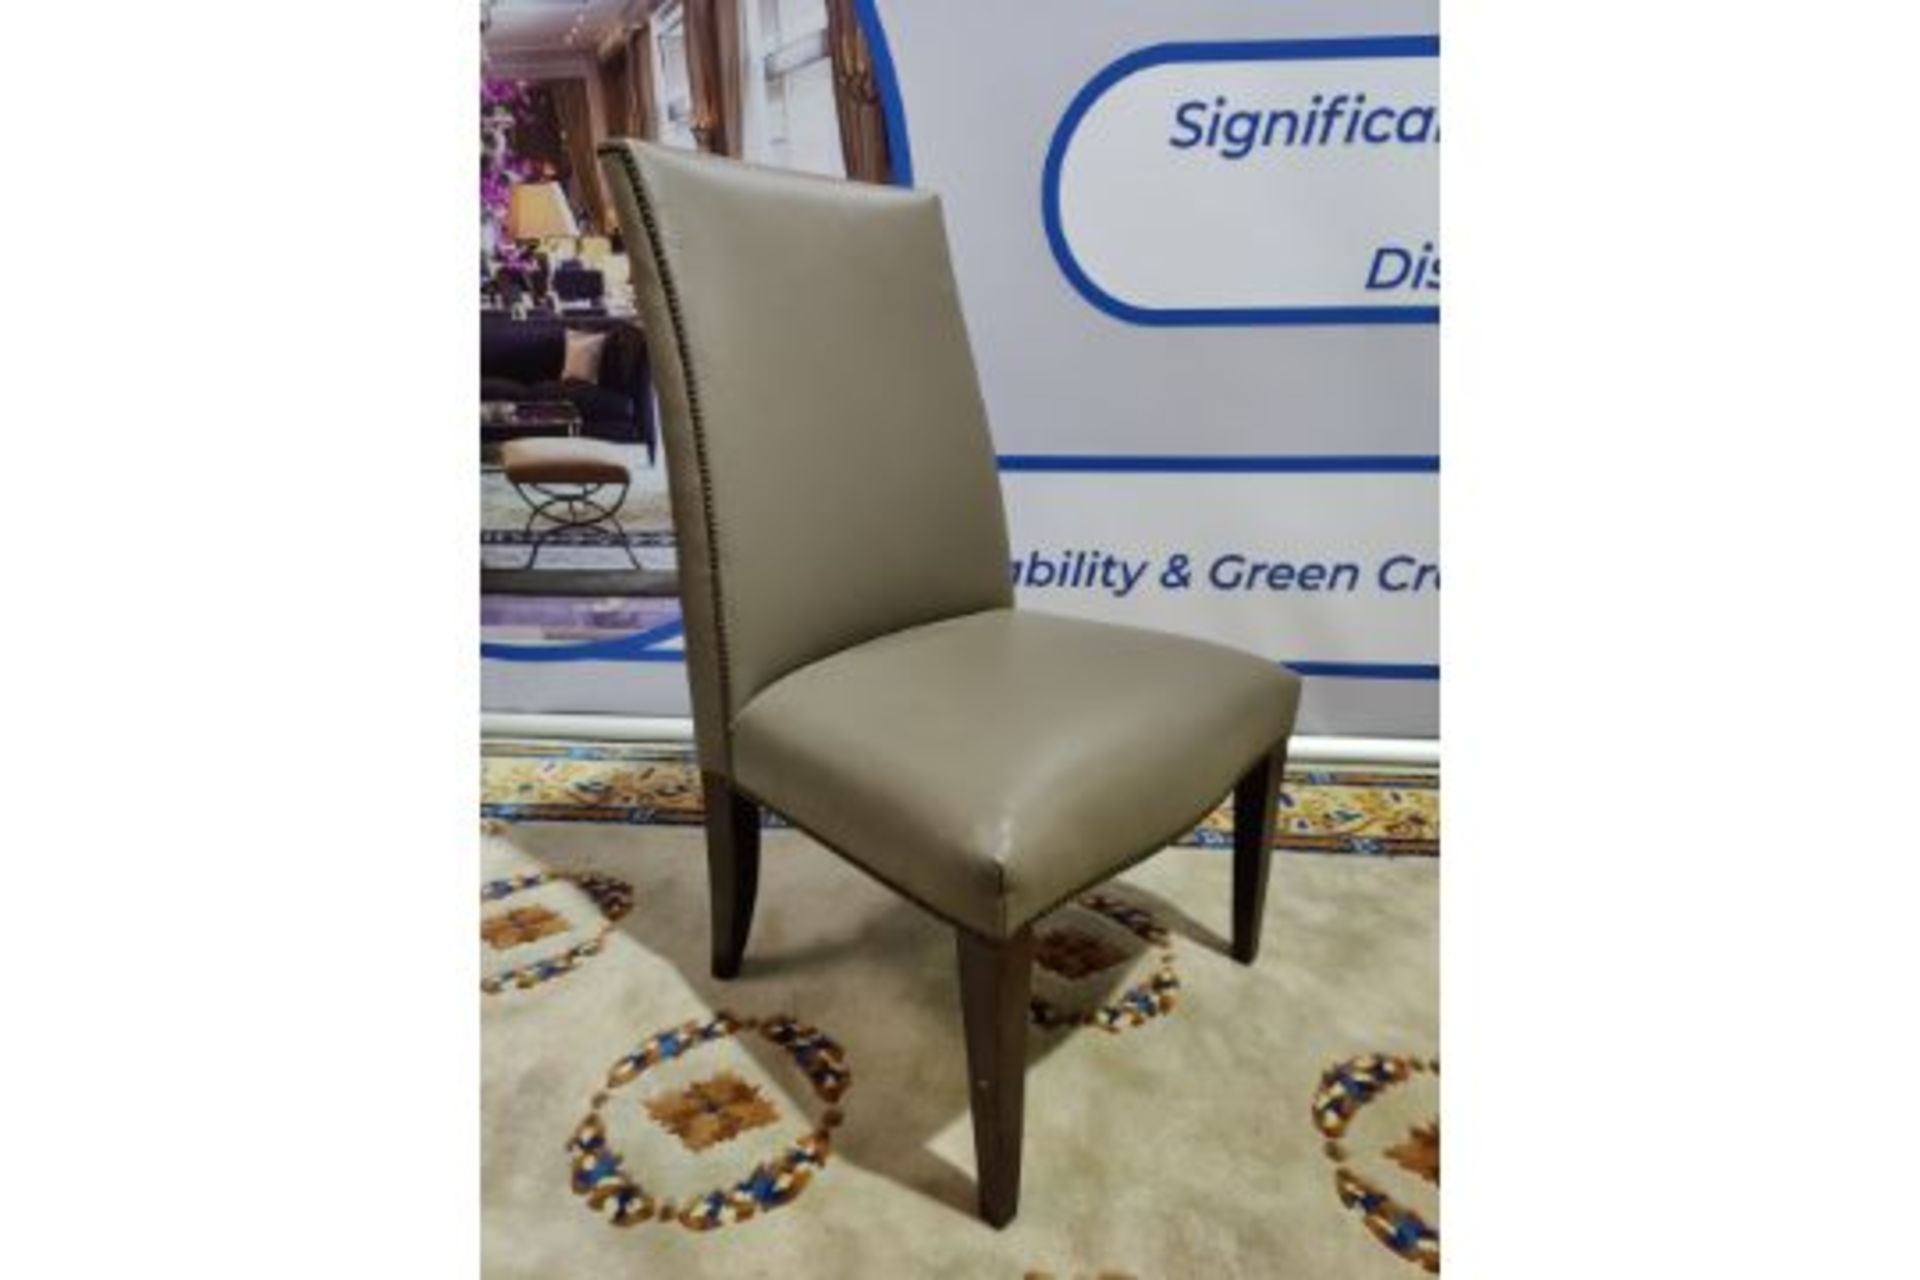 Leather High Back Chair With Stud Finish Detail Stained Wooden Legs 55 x 46 x 98cm - Image 2 of 2